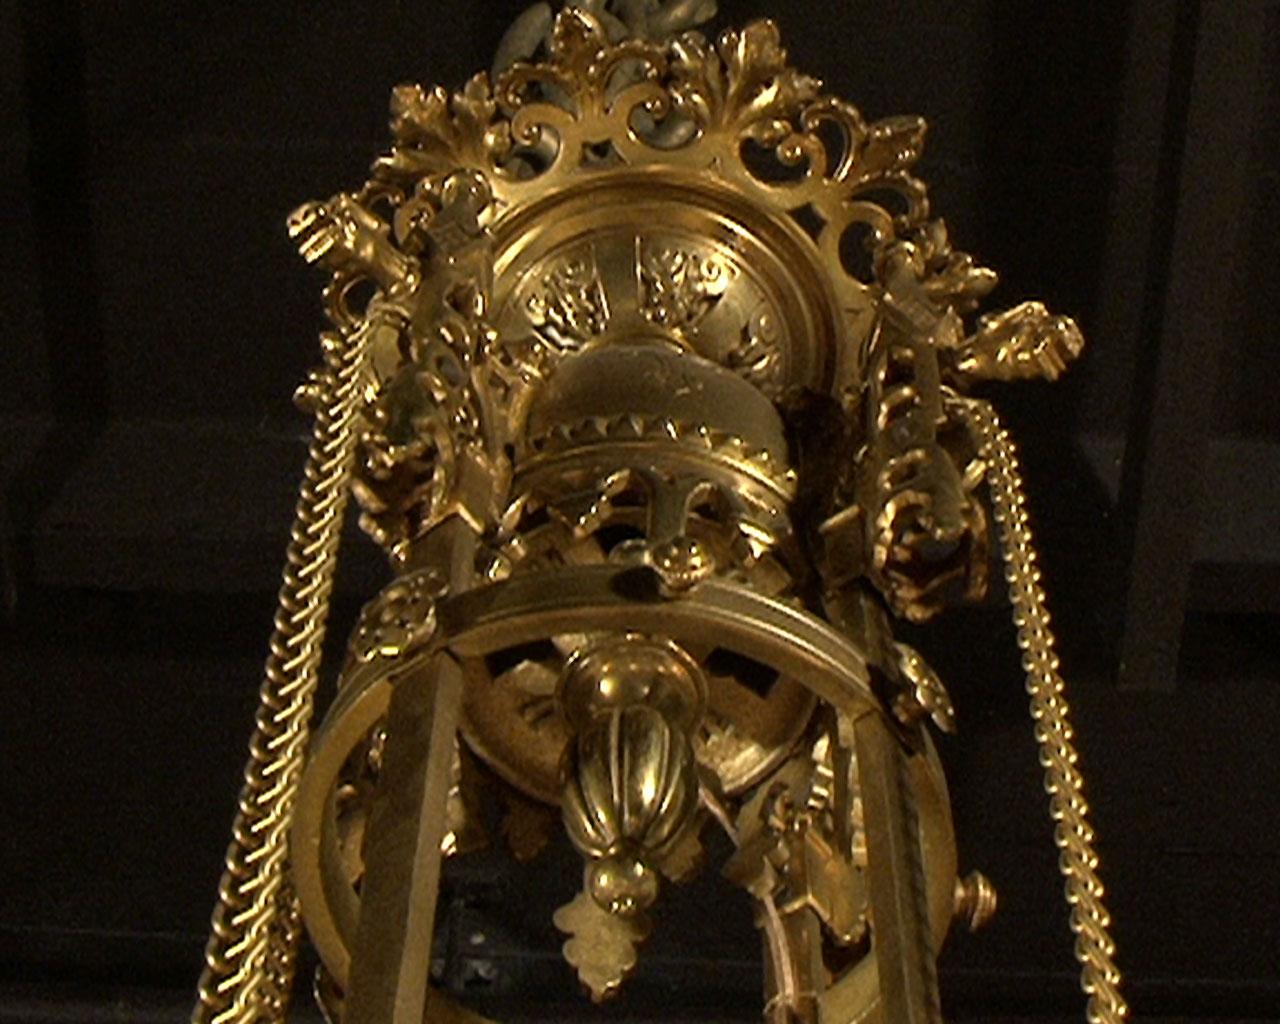 This gilt bronze chandelier has eight branches which take the form of glassware and candles and surround a semi spherical decorated with glass gemstones. Result of a very careful work, this chandelier has incised decorations of fleur de lis, crosses